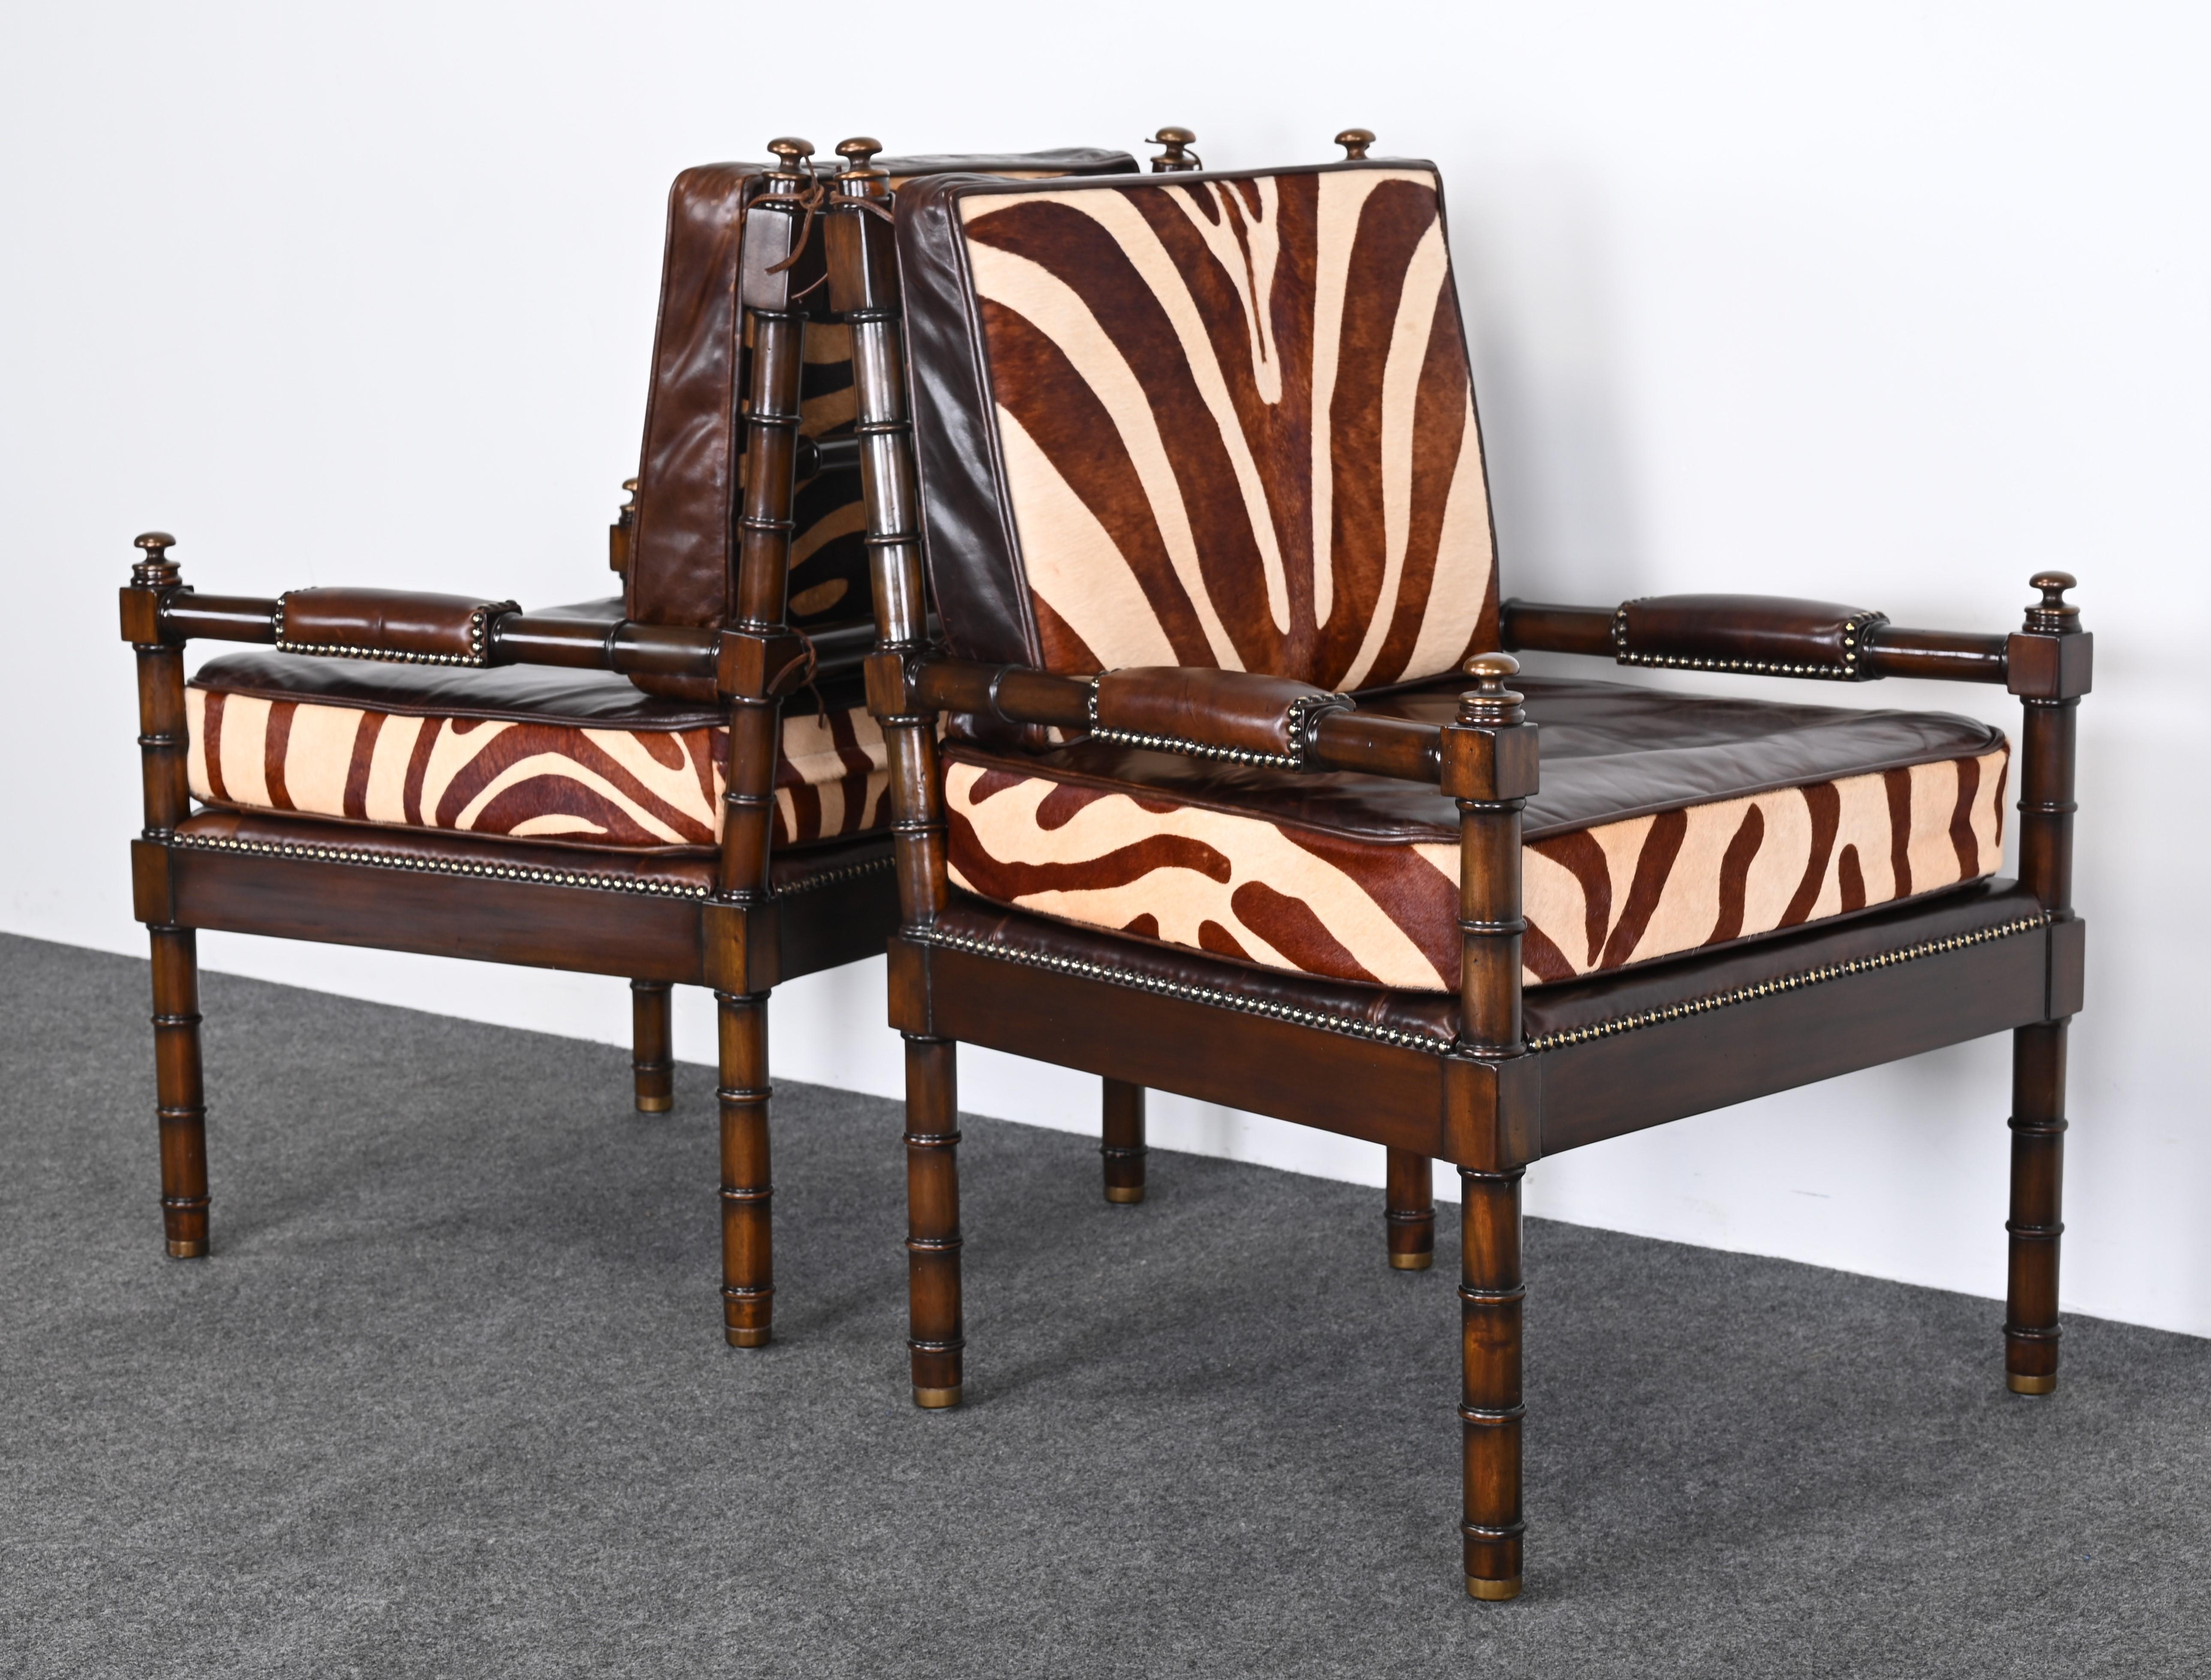 Maitland Smith Bamboo Armchairs with Cowhide Zebra Print Leather Seats, 1990s For Sale 8